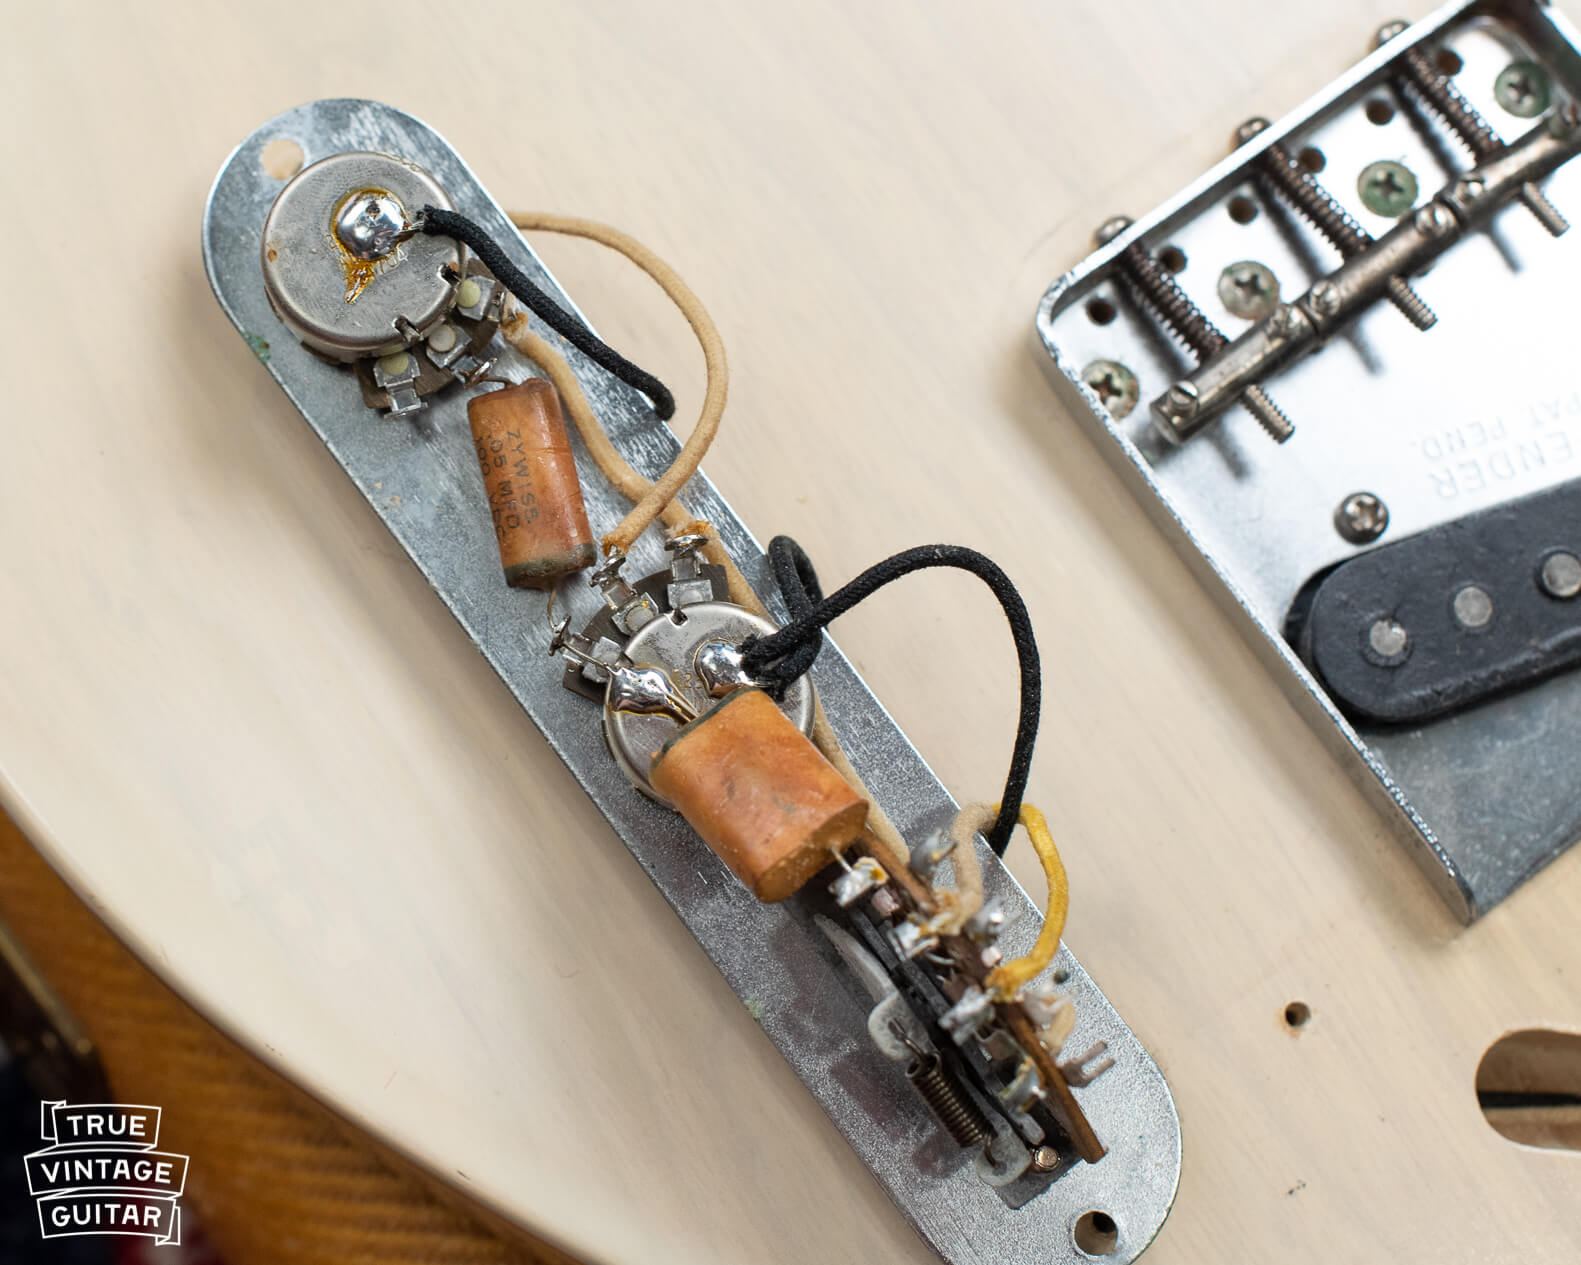 How to date Fender Telecaster with potentiometer codes